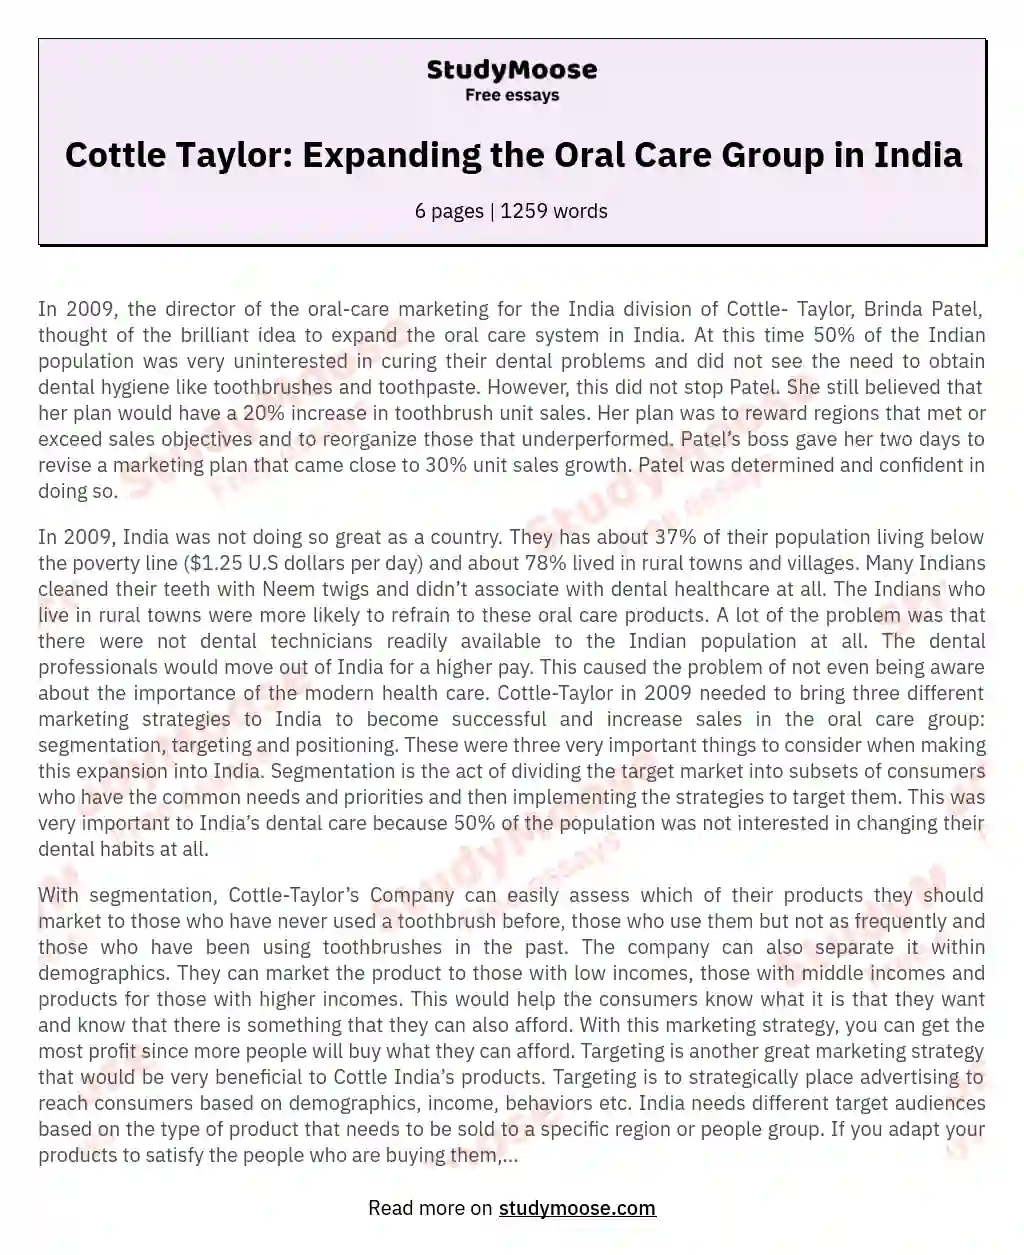 Cottle Taylor: Expanding the Oral Care Group in India